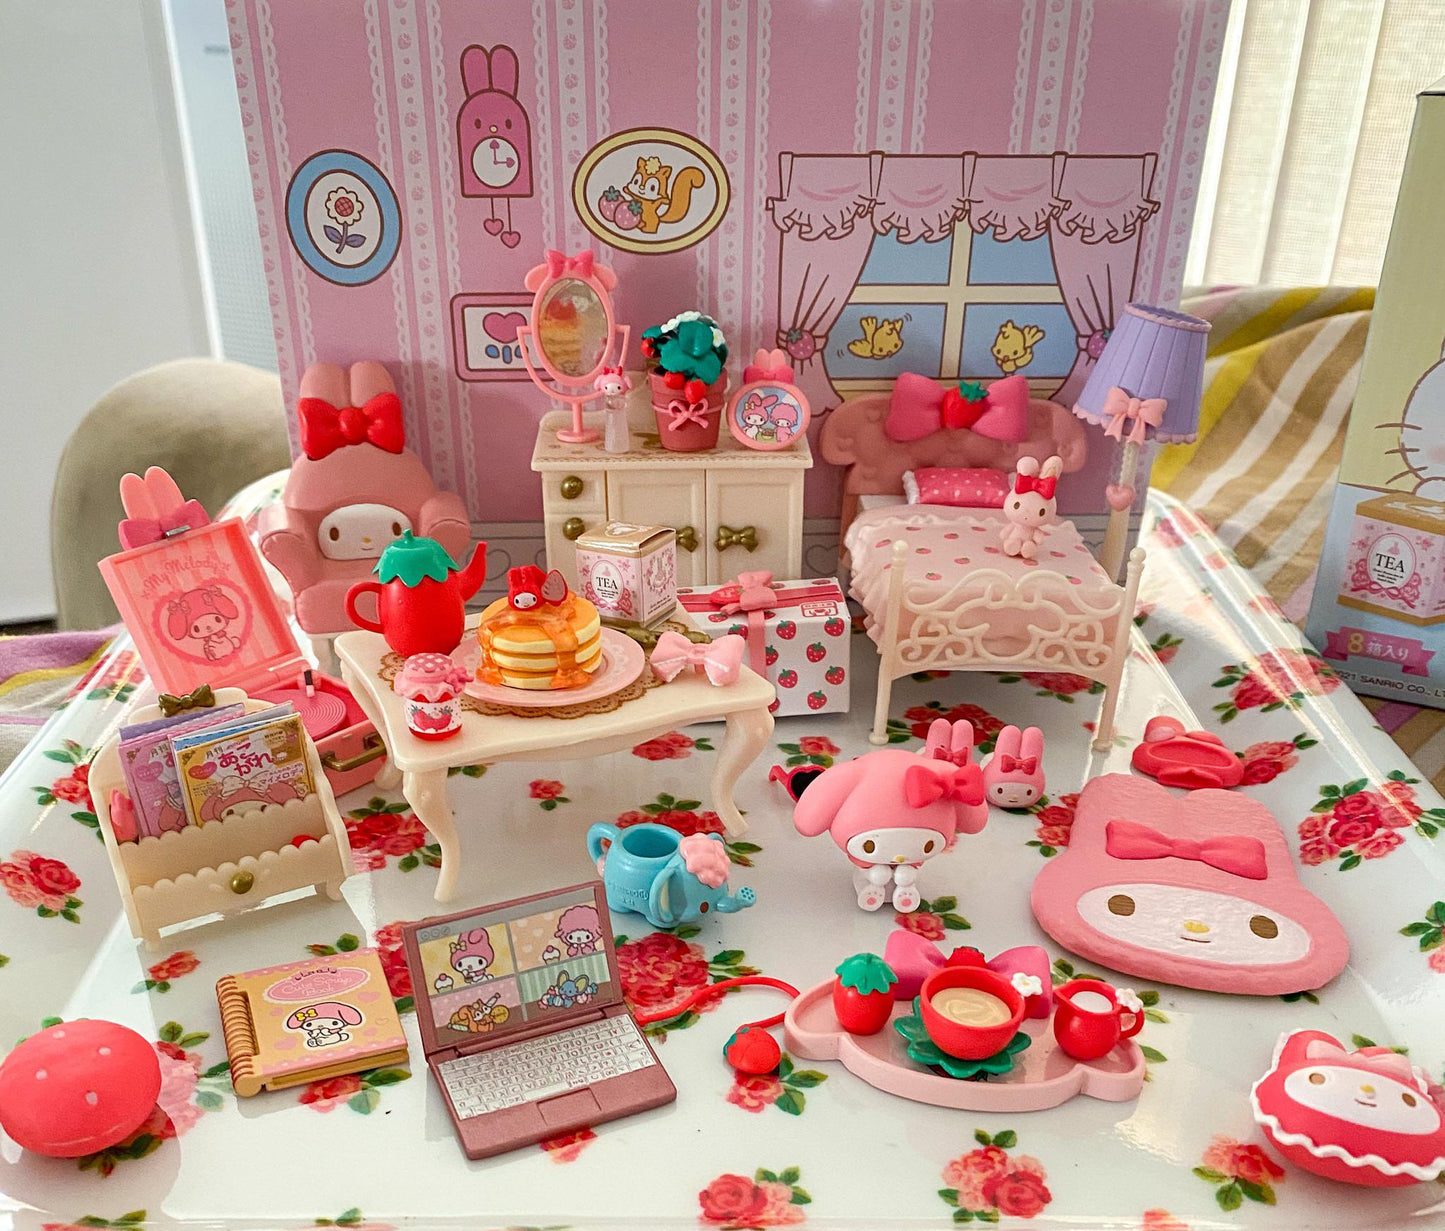 Sanrio My Melody Bedroom Miniature Complete Set by Re-ment